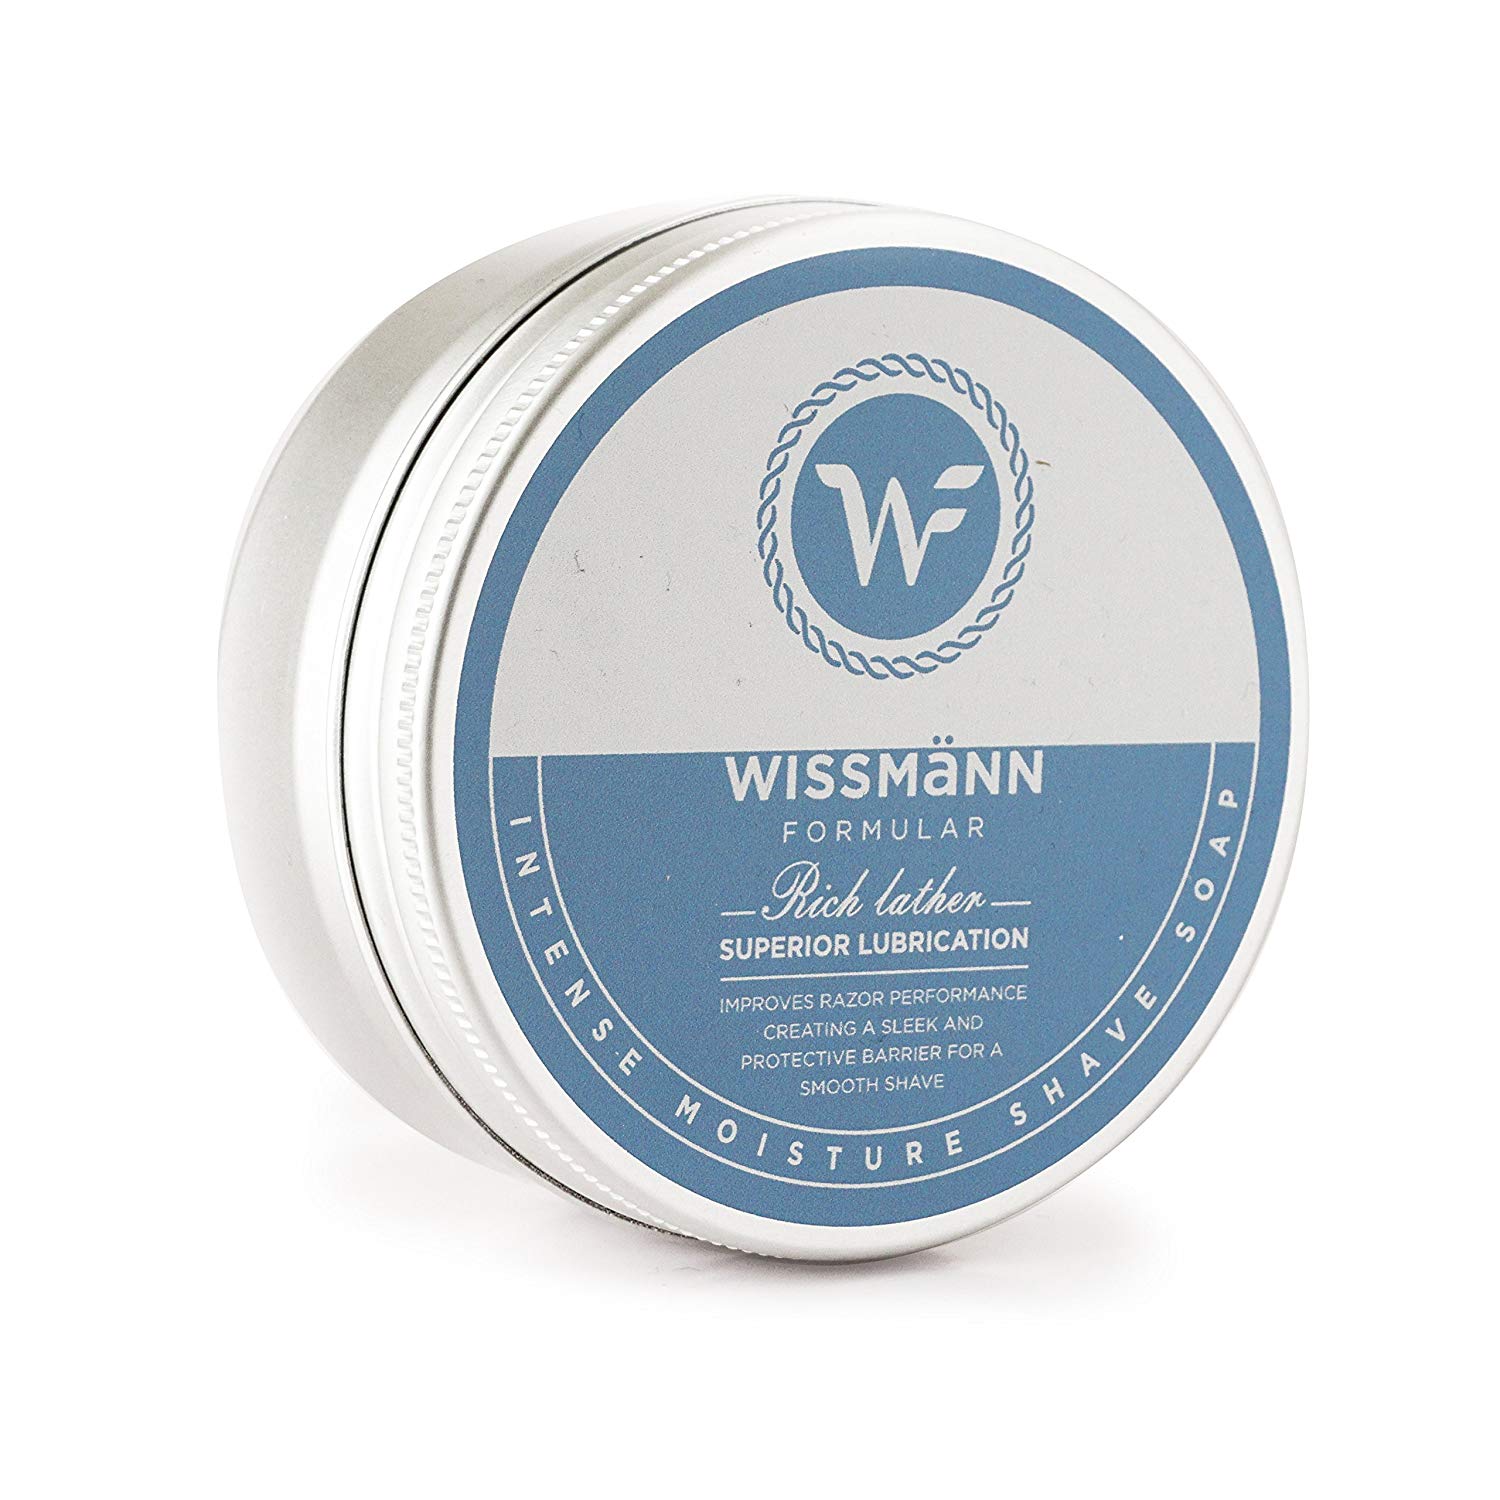 Shaving and Personal Care Products Logo - Wissmann formular Intense Moisture Shaving soap with Dead Sea Mud